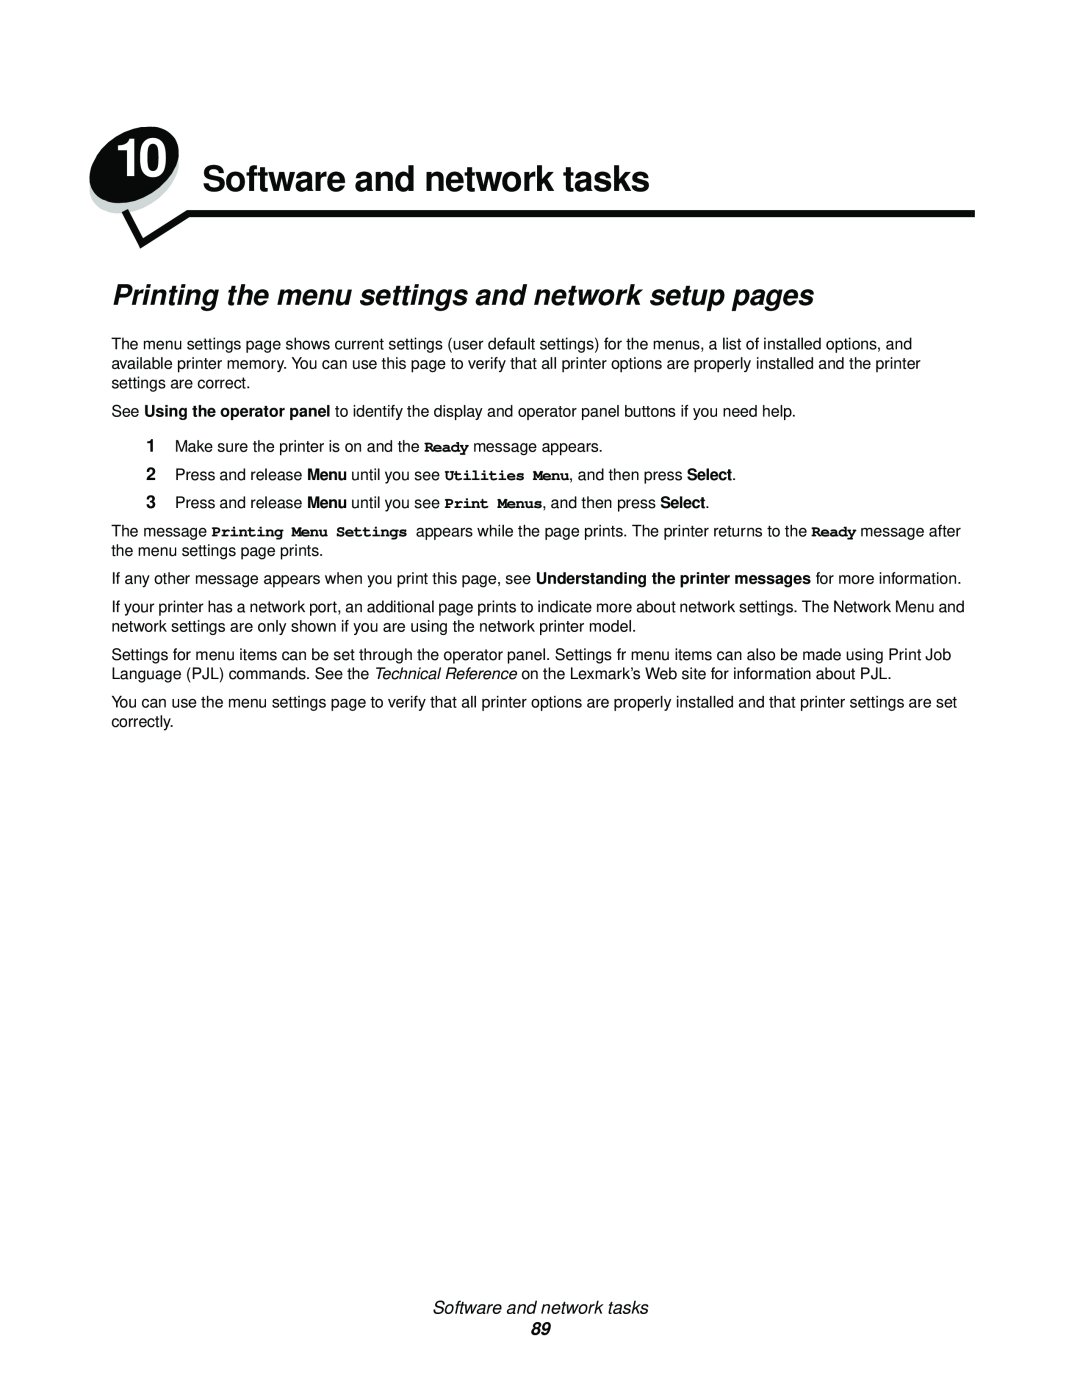 Lexmark 340, 342n manual Software and network tasks, Printing the menu settings and network setup pages 